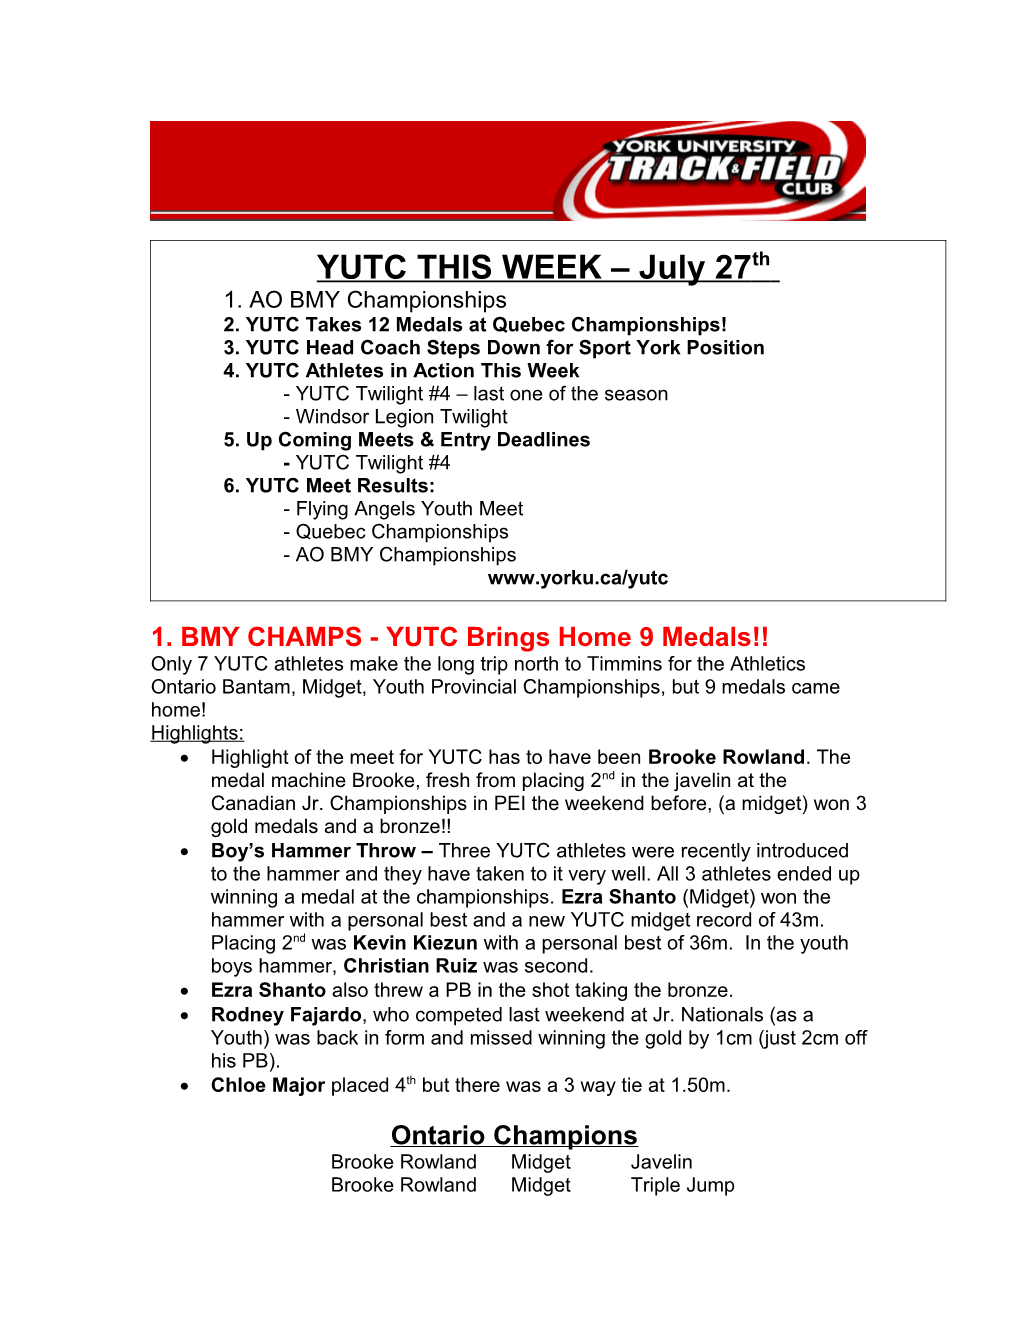 1. BMY CHAMPS - YUTC Brings Home 9 Medals